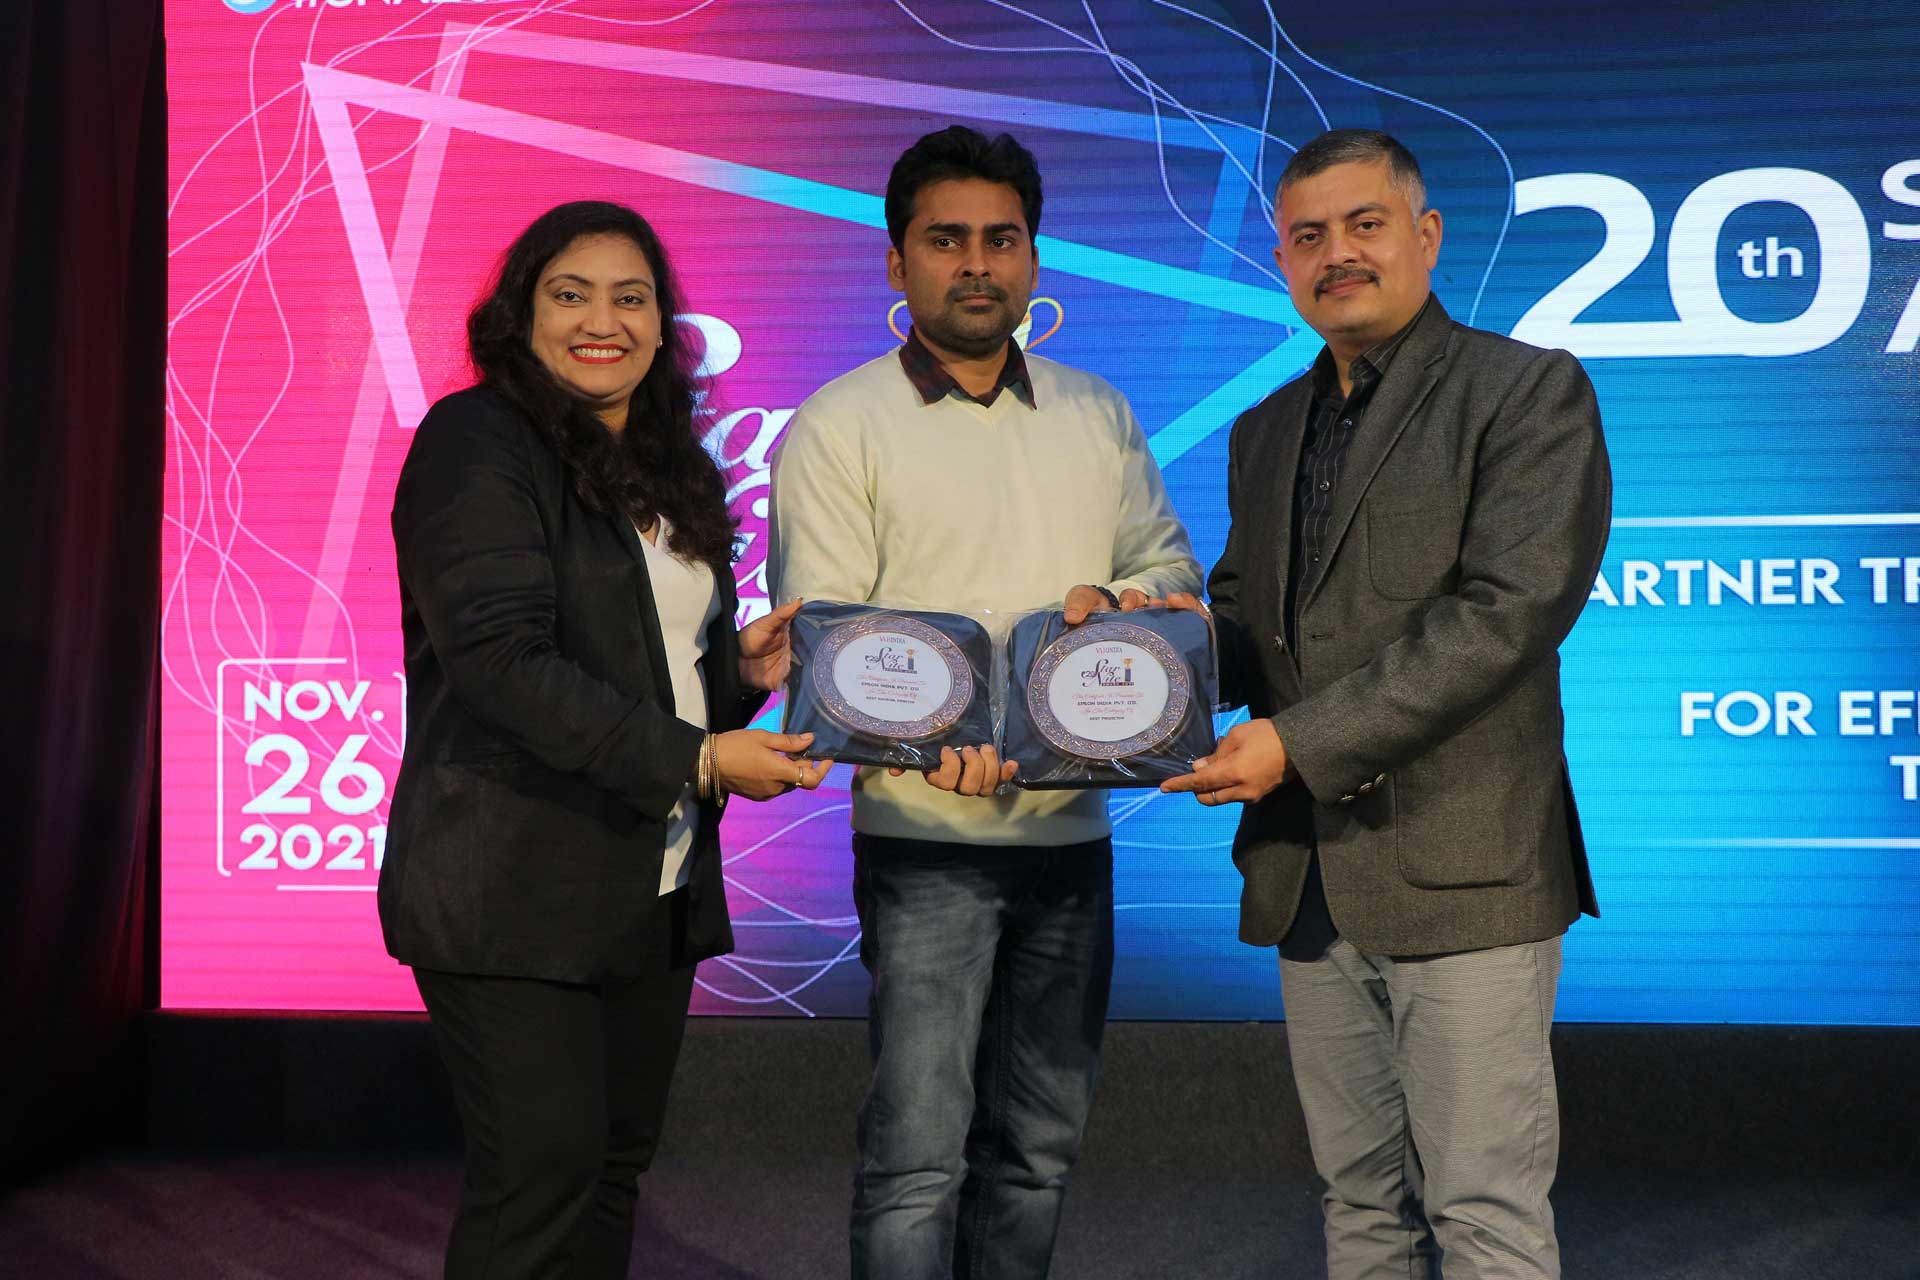 Best InkTank Printer and Best Projector Award goes to Epson India Pvt. Ltd. at 20th Star Nite Awards 2021